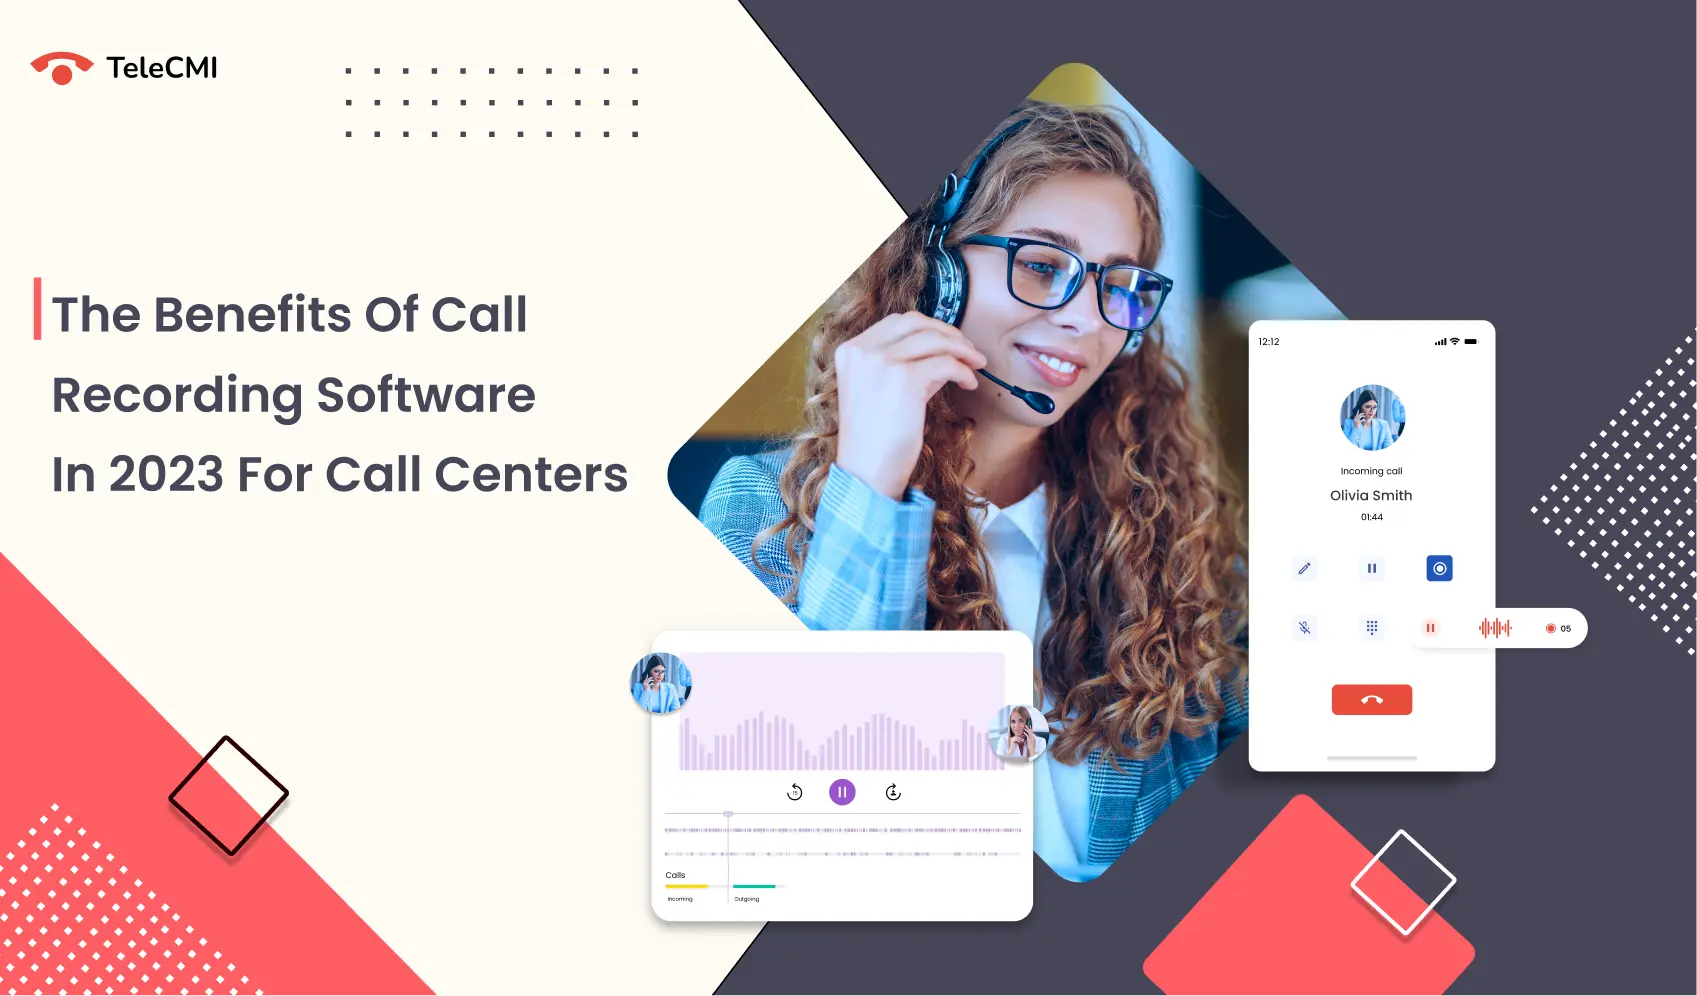 The benefits of call recording software